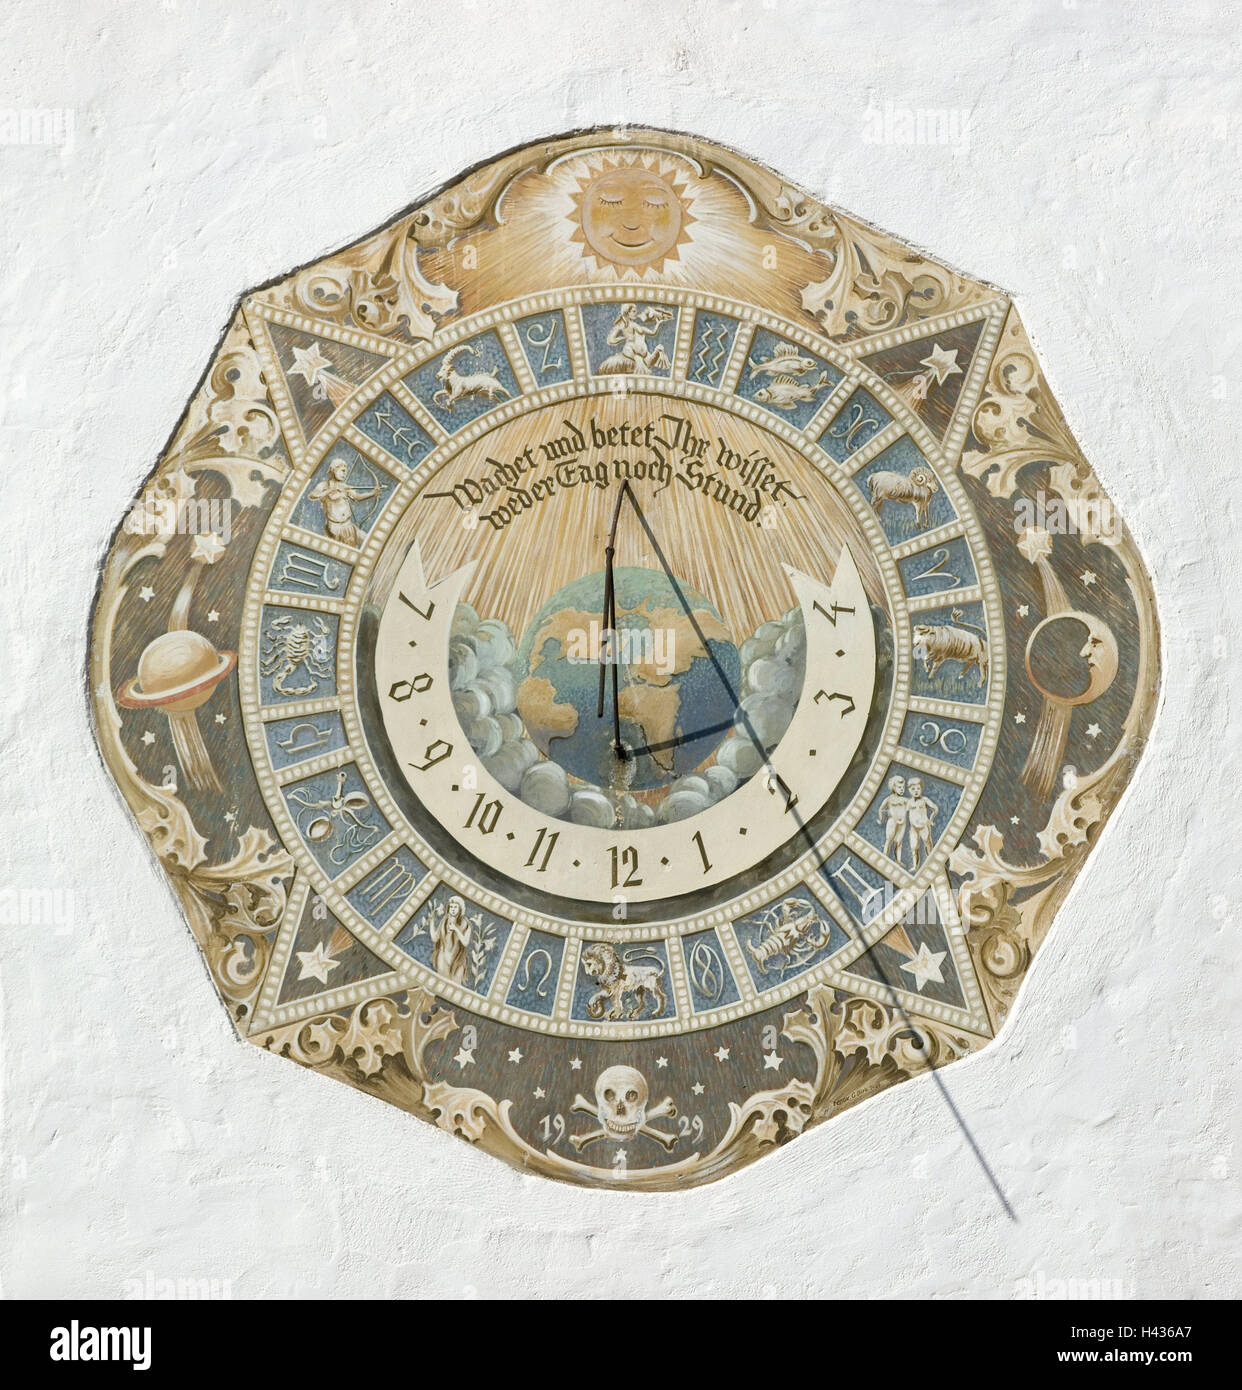 More poorly, sundial, Germany, Riedlingen, facade, wall, house facade, clock, time knife, solar state, scale, wand, gnomon, display, hours, time, product photography, Stock Photo